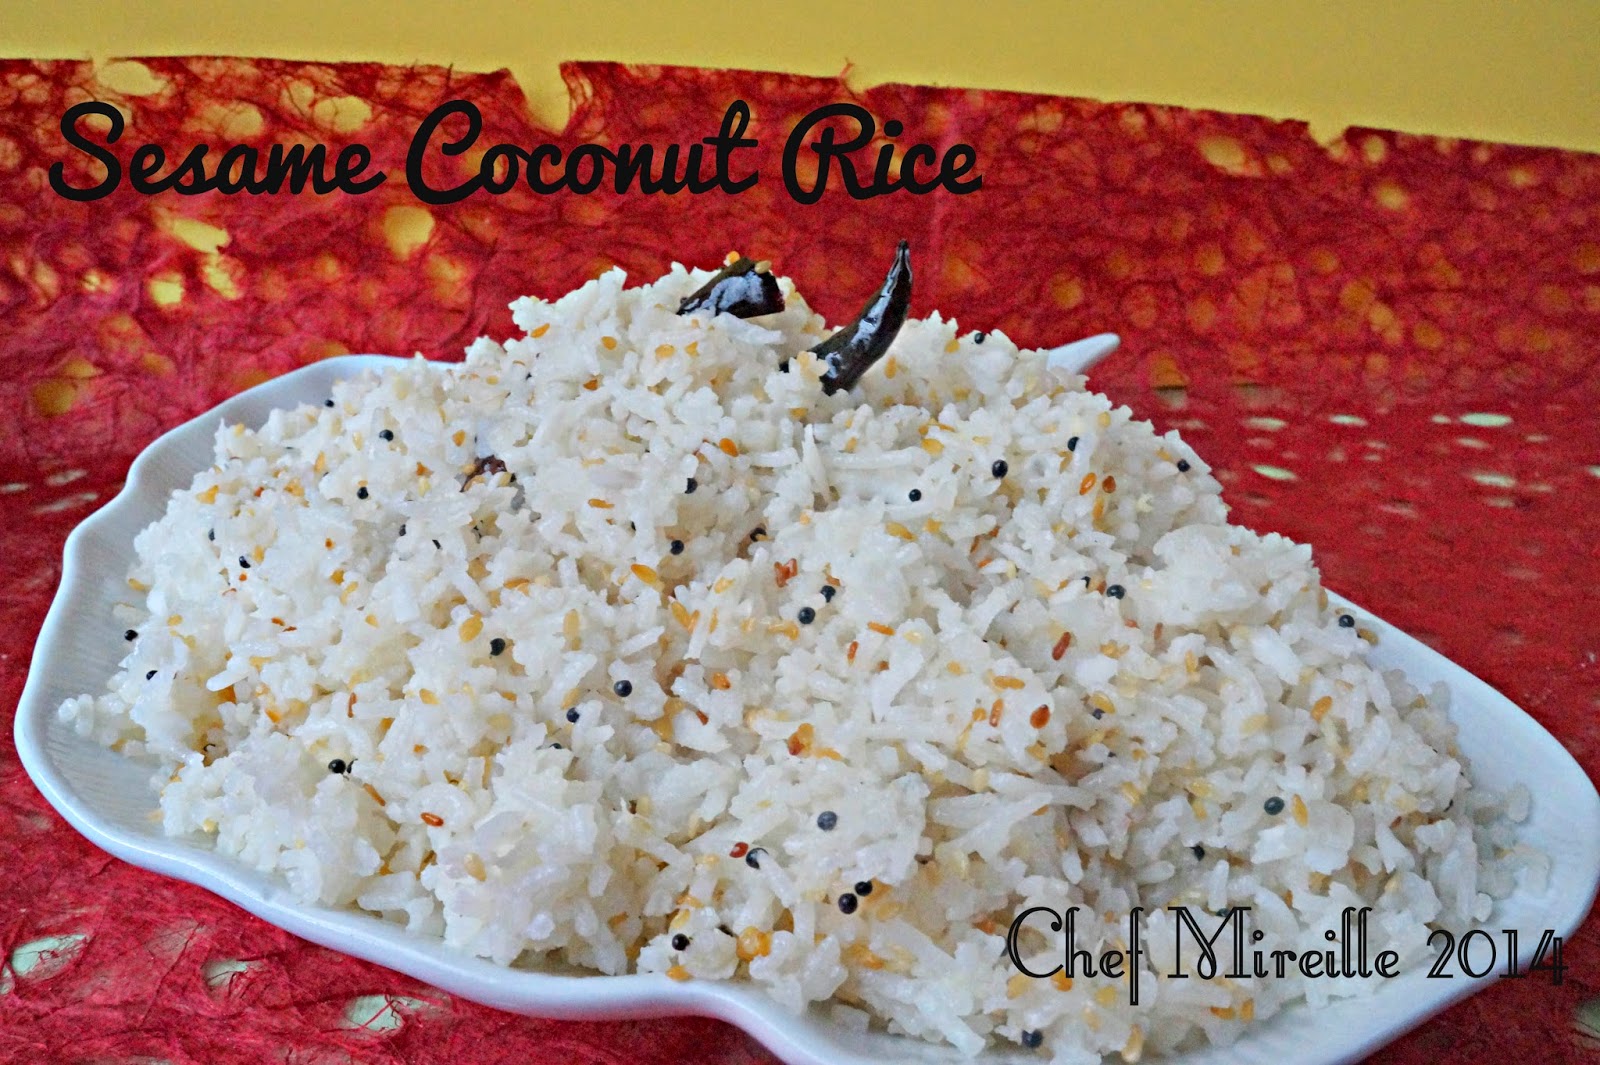 sesame coconut rice served on a plate